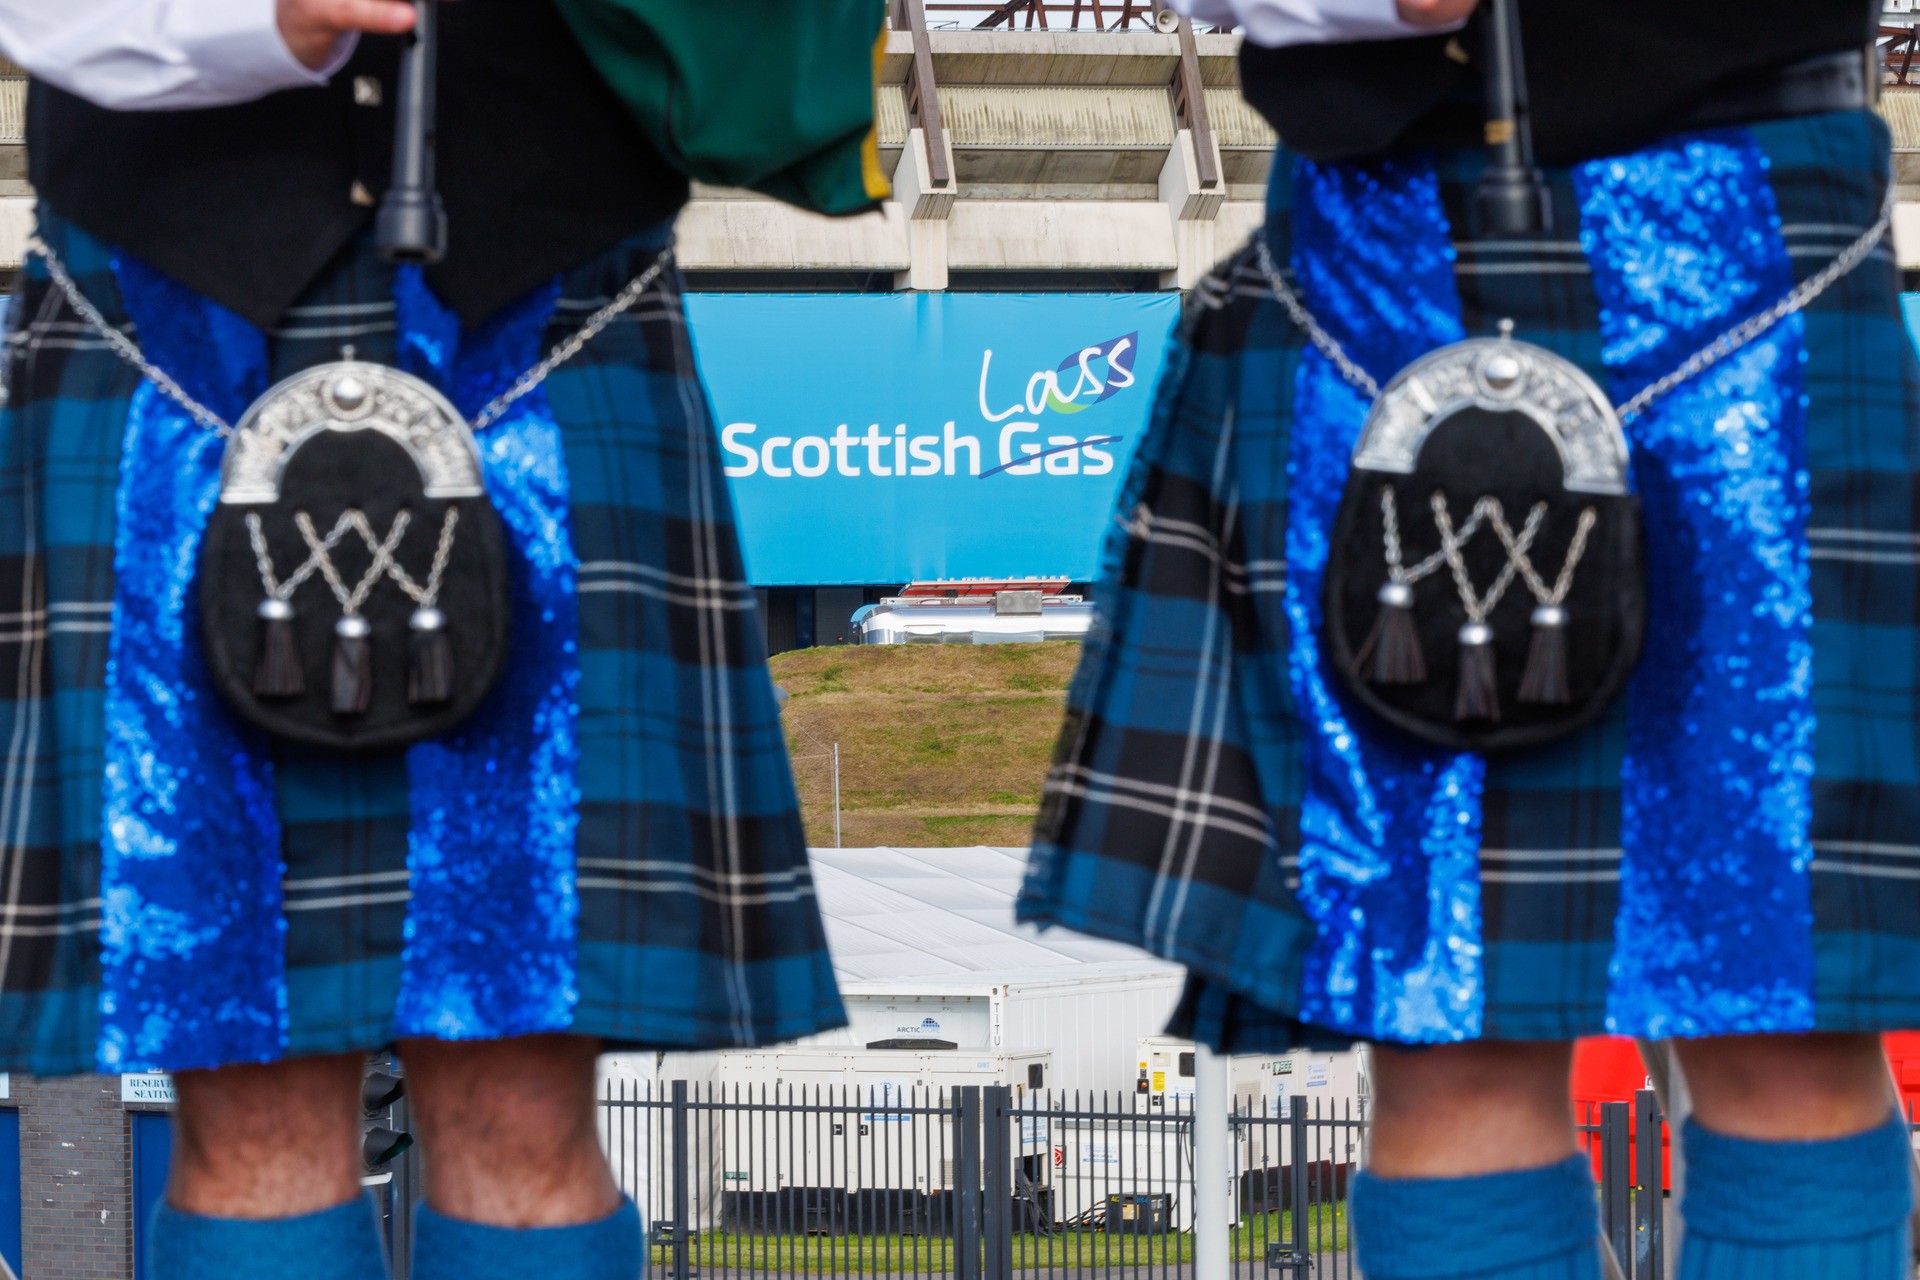 Scottish Gas switched its stadium signage to ‘Scottish Lass’ to greet the singer and celebrate her roots